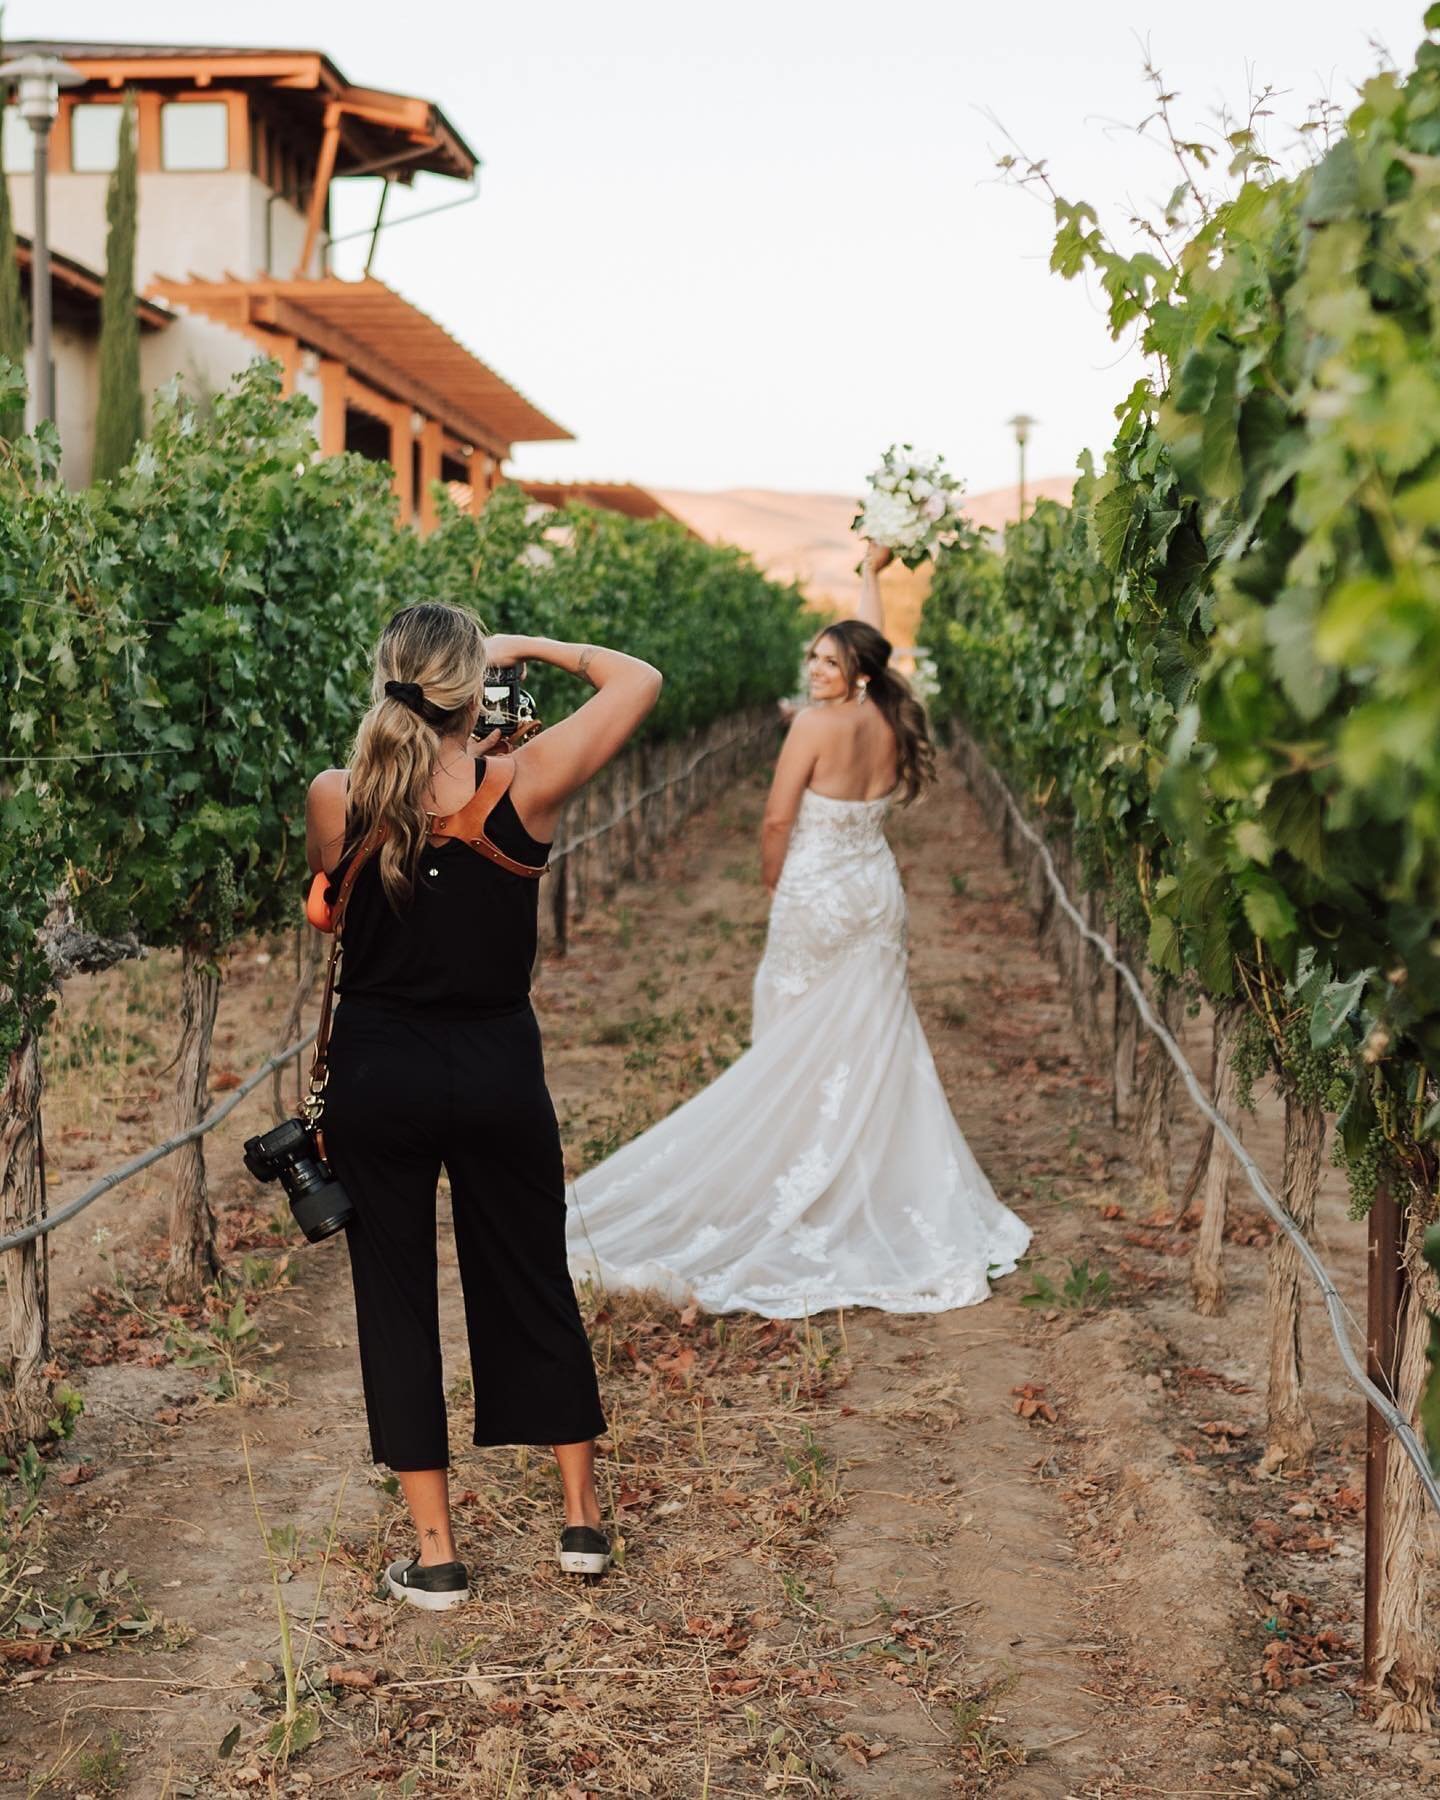 BTS of portraits in the vineyards! I have soo many weddings I have never shared from previous years. During my time off I&rsquo;ve been looking through and gathering up some to post and blog about! 

This wedding was July 2022 with some of my favorit